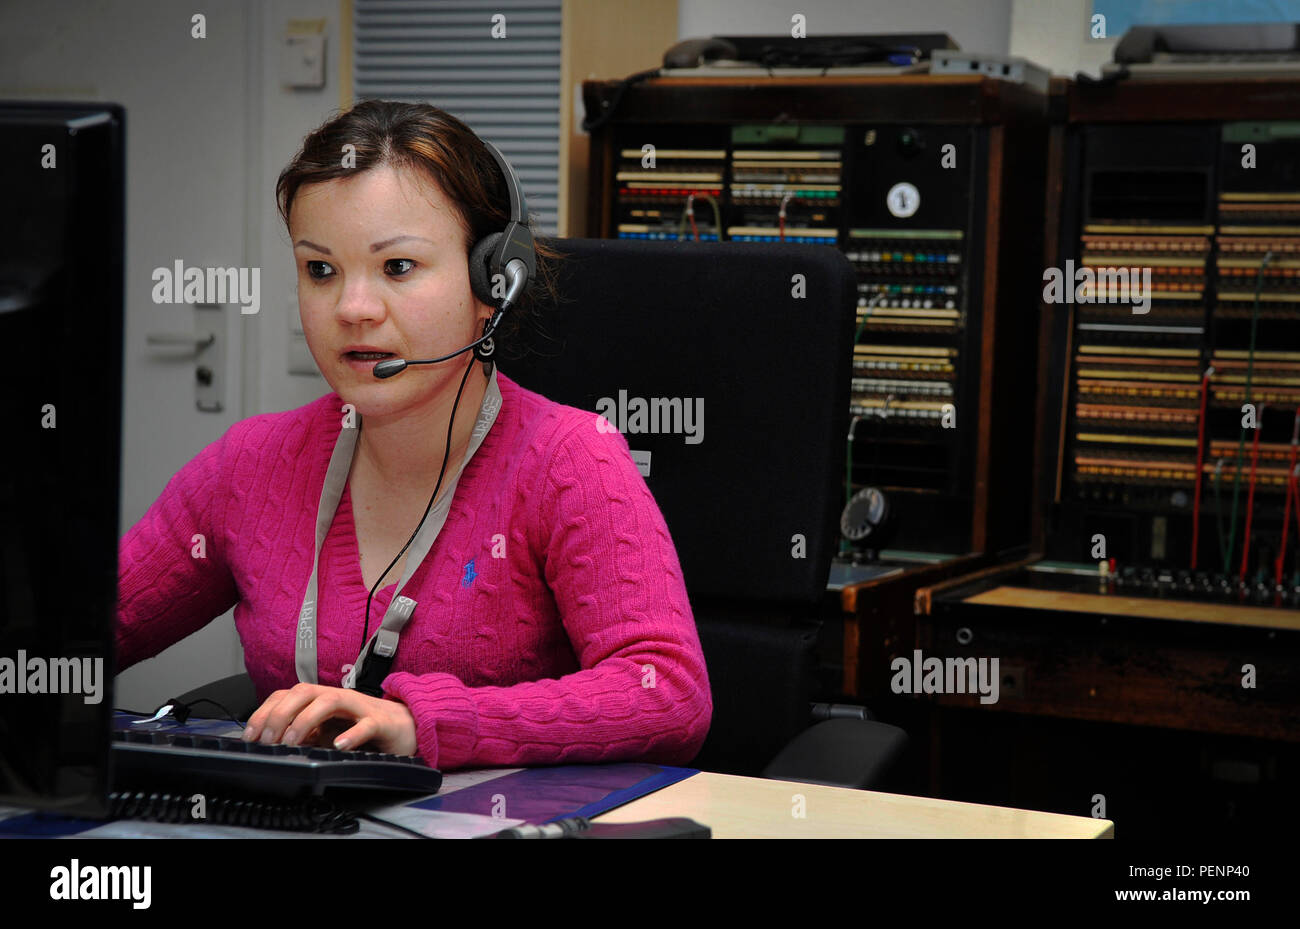 Verena Klein, 86th Communications Squadron consolidated switchboard operator, transfers a caller to the appropriate organization Jan. 4, 2015, at Ramstein Air Base, Germany. The operators answer more than 1.5 million calls annually and service the Air Force, Army, Navy, Marines and U.S. State Department personnel around the world. (U.S. Air Force photo/Airman 1st Class Larissa Greatwood) Stock Photo